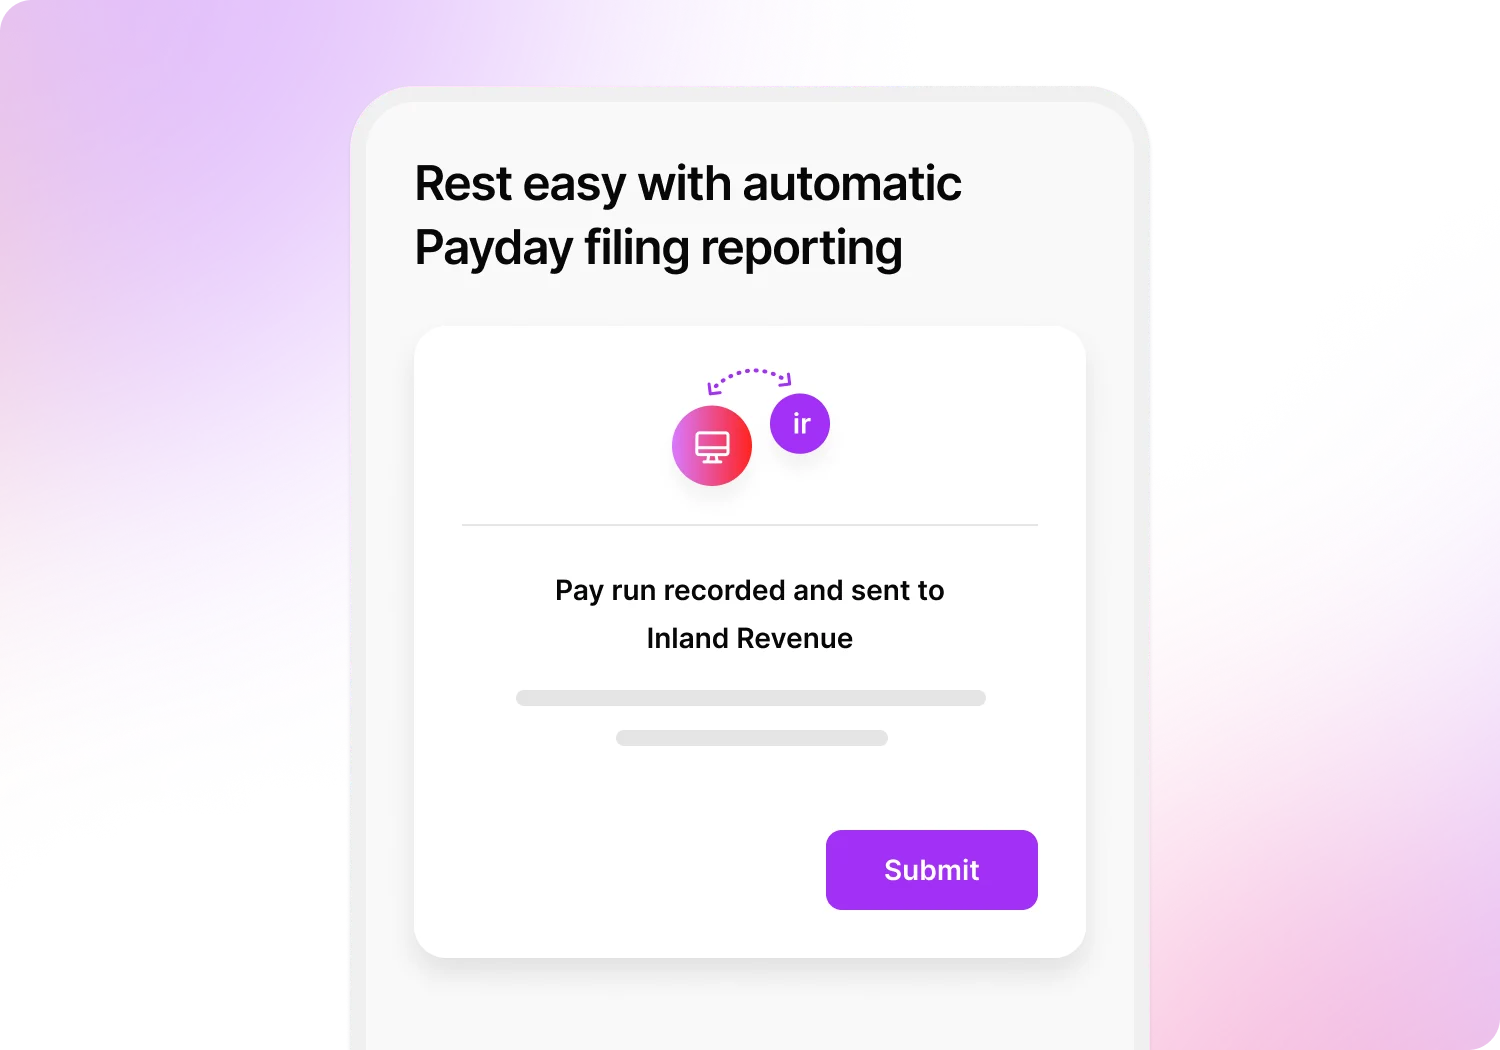 Rest easy with automatic payday filing recording. Record Pay runs and submit direct to Inland Revenue.